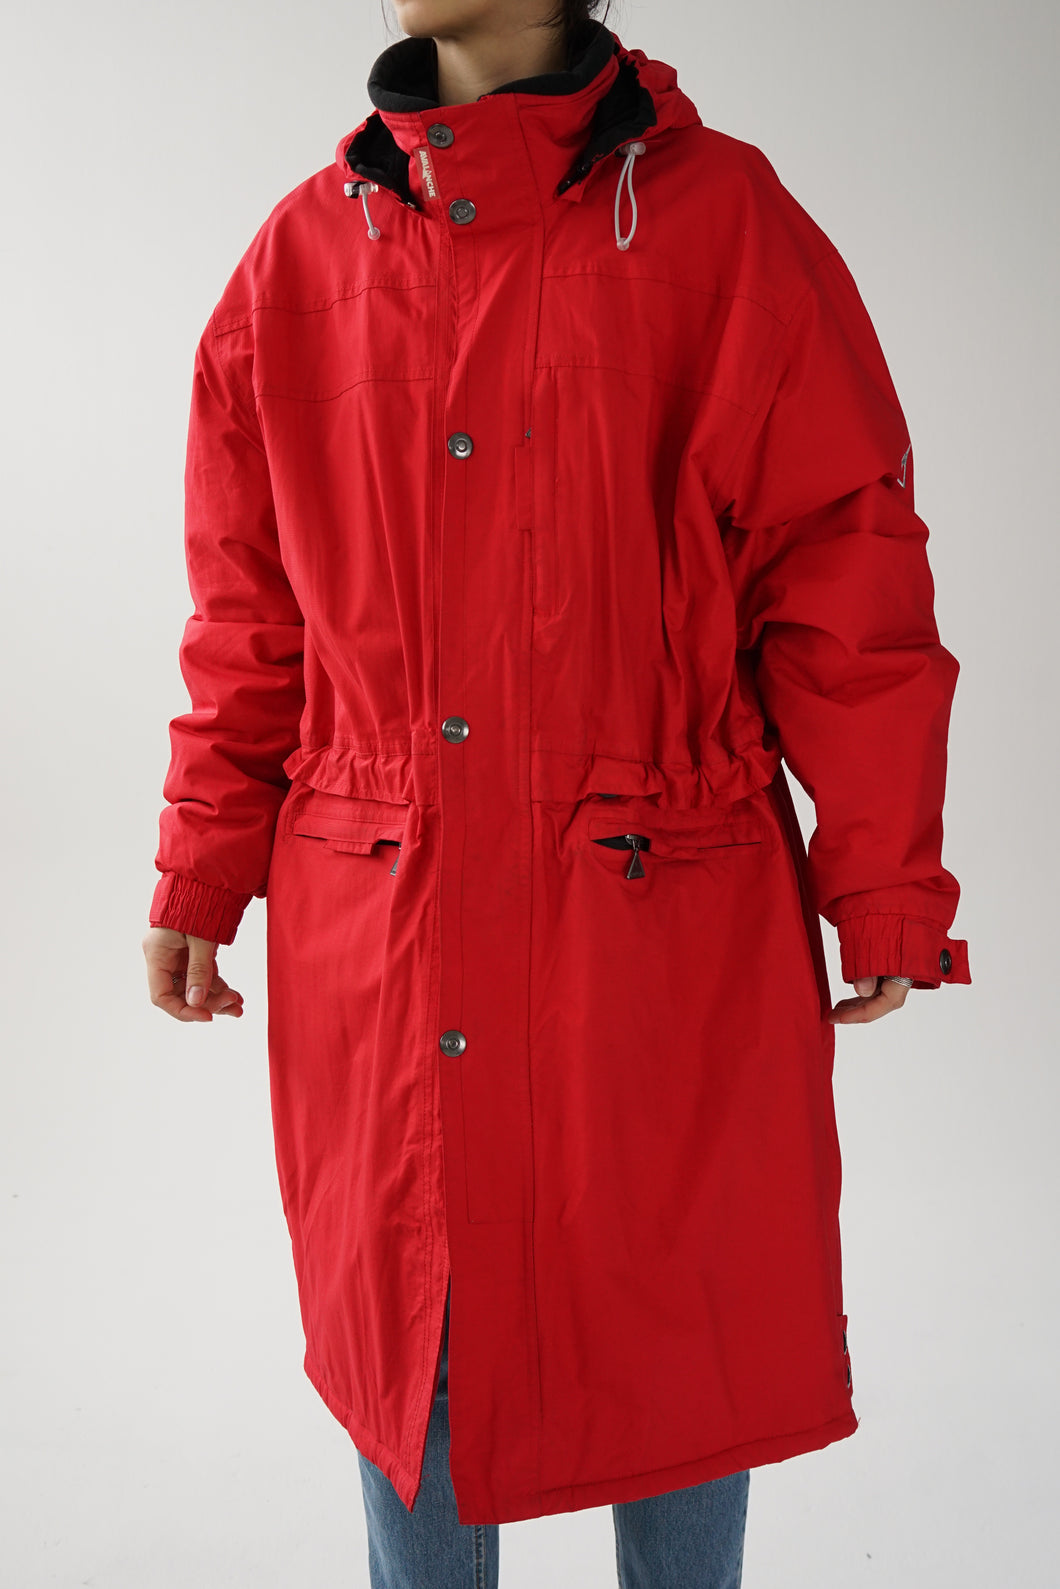 Avalanche long ski jacket in red for women XL